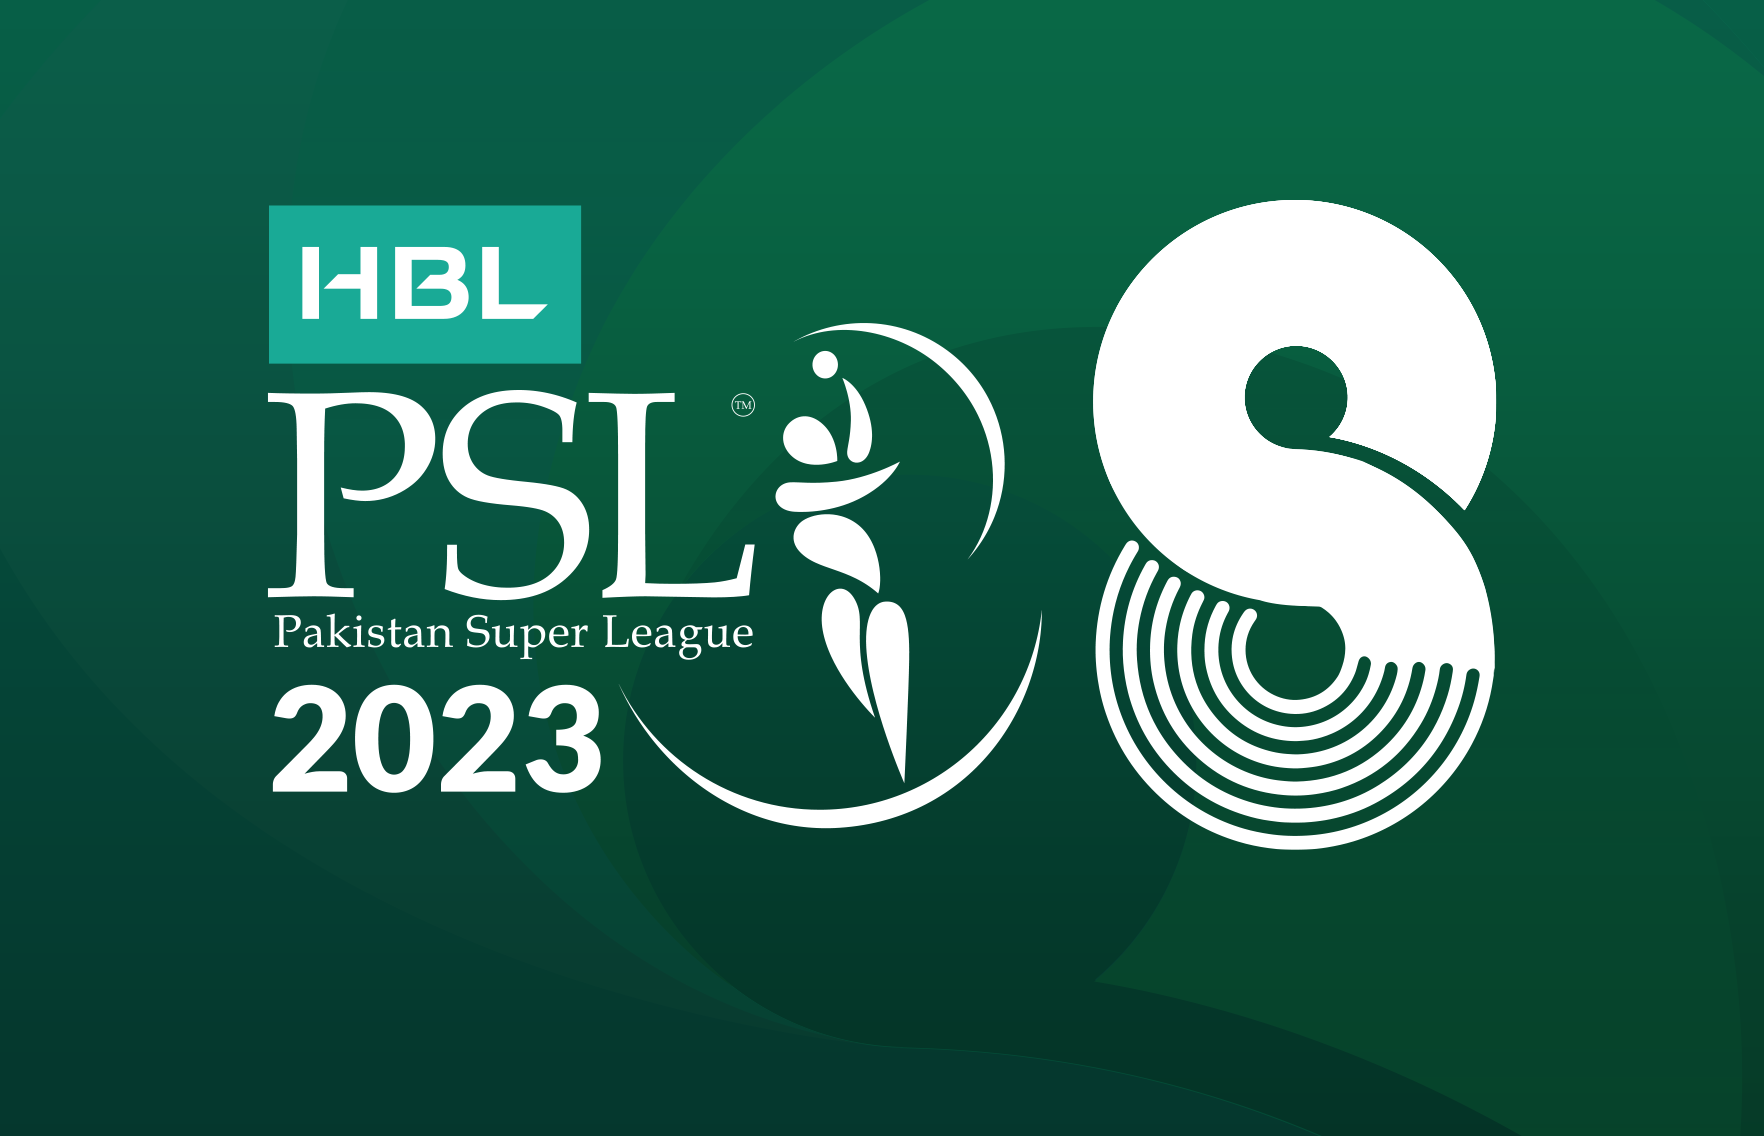 PCB announces 50pc discount on HBL PSL 8 tickets for children Press Release PCB